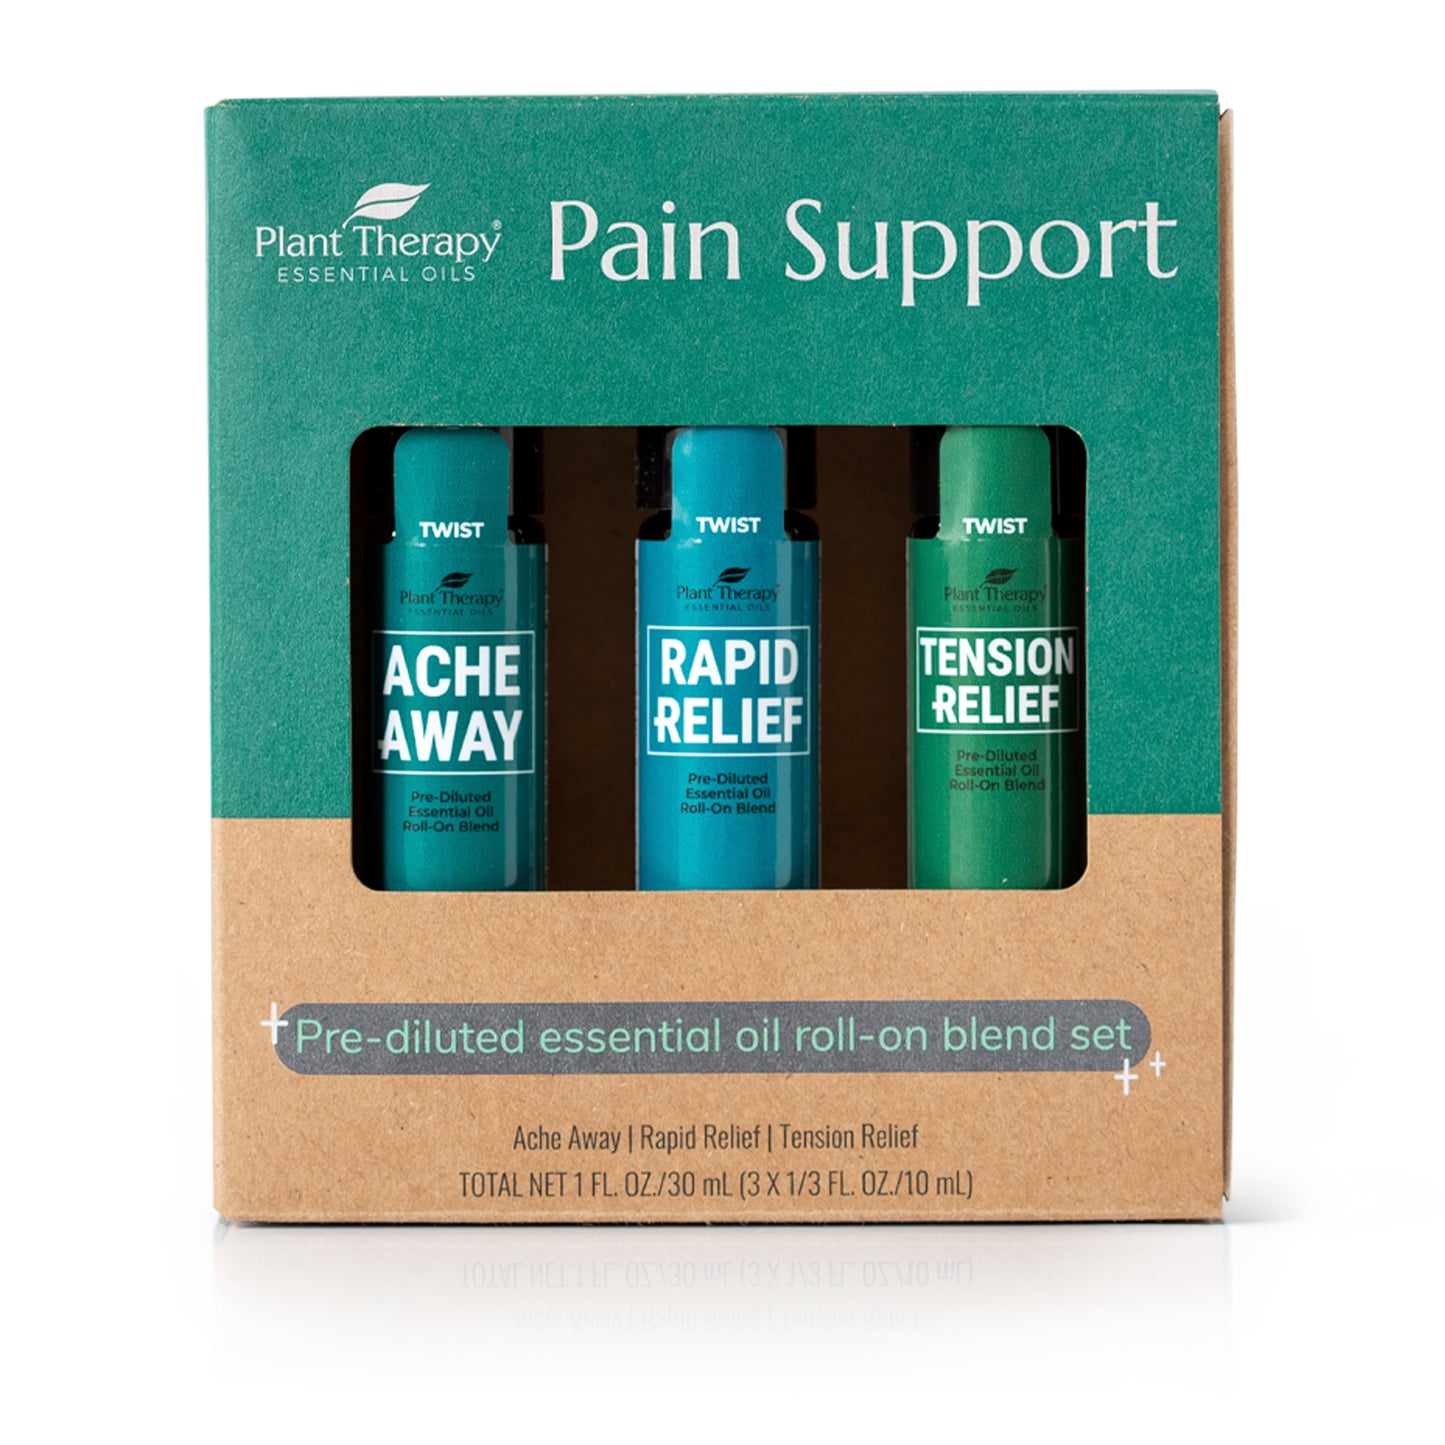 Pain Support Essential Oil Blend Roll On Set